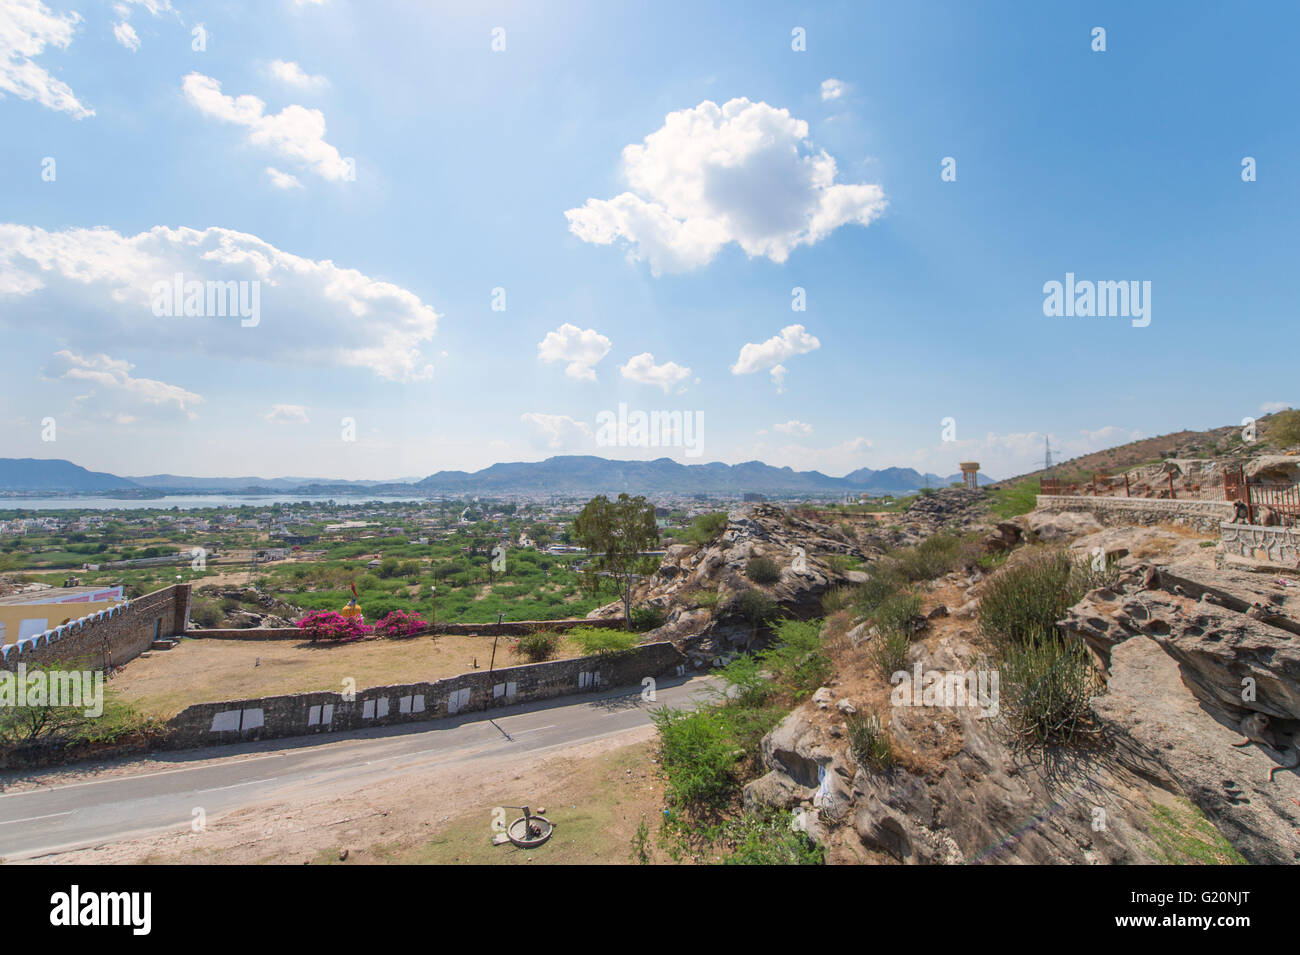 View of the Ajmer town in India with blue sky and clouds formation. Stock Photo